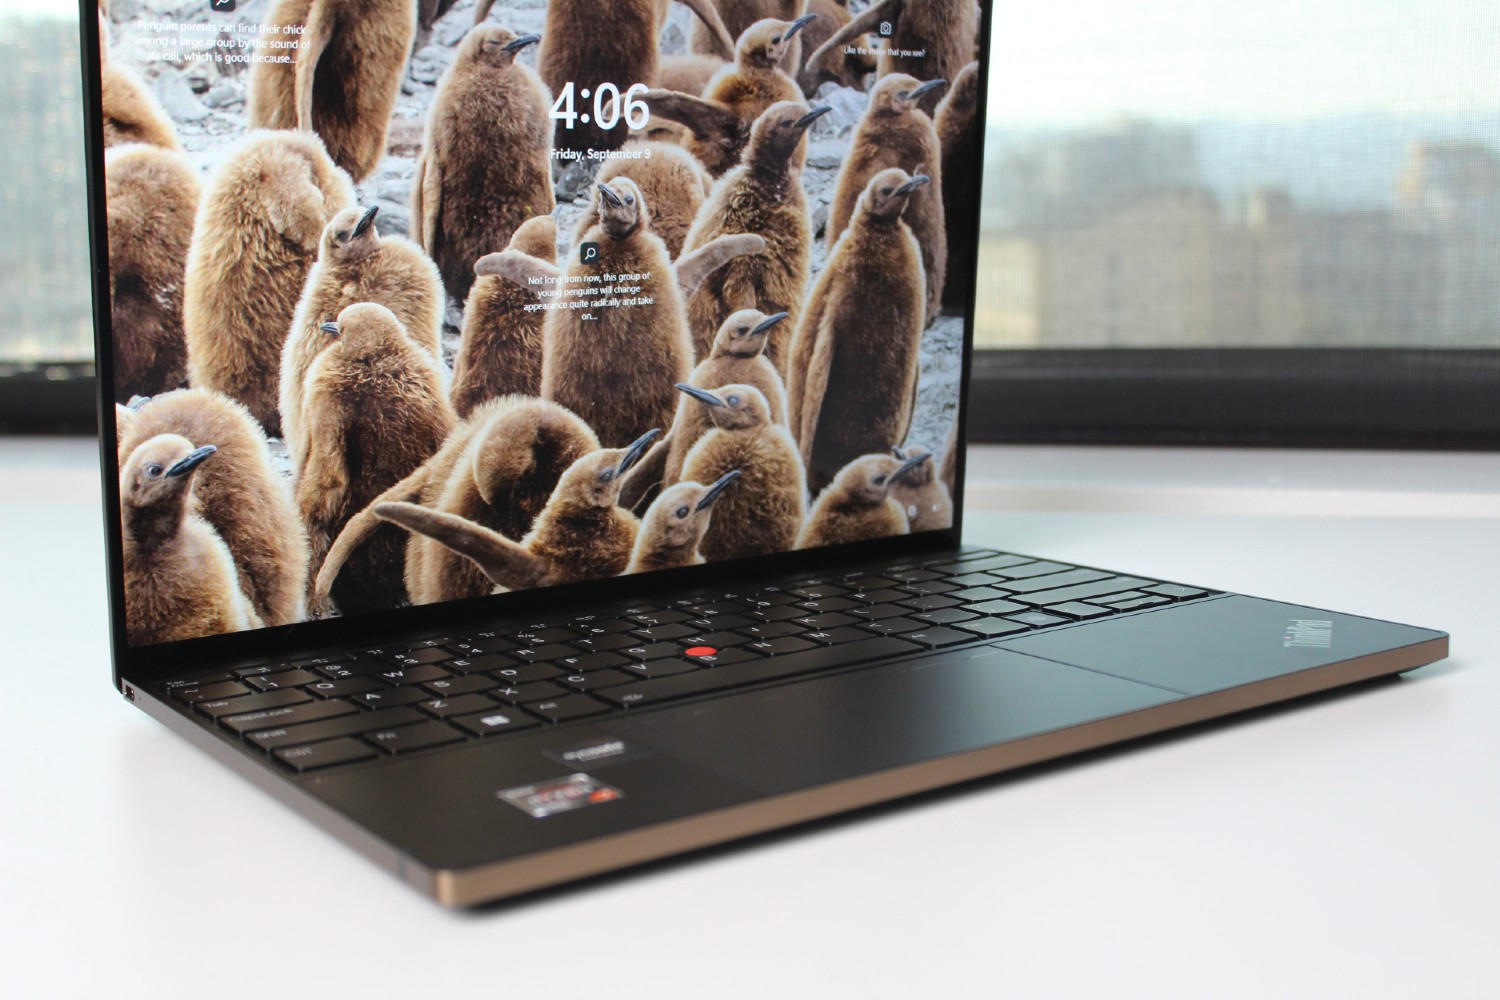 The screen of the ThinkPad Z13.